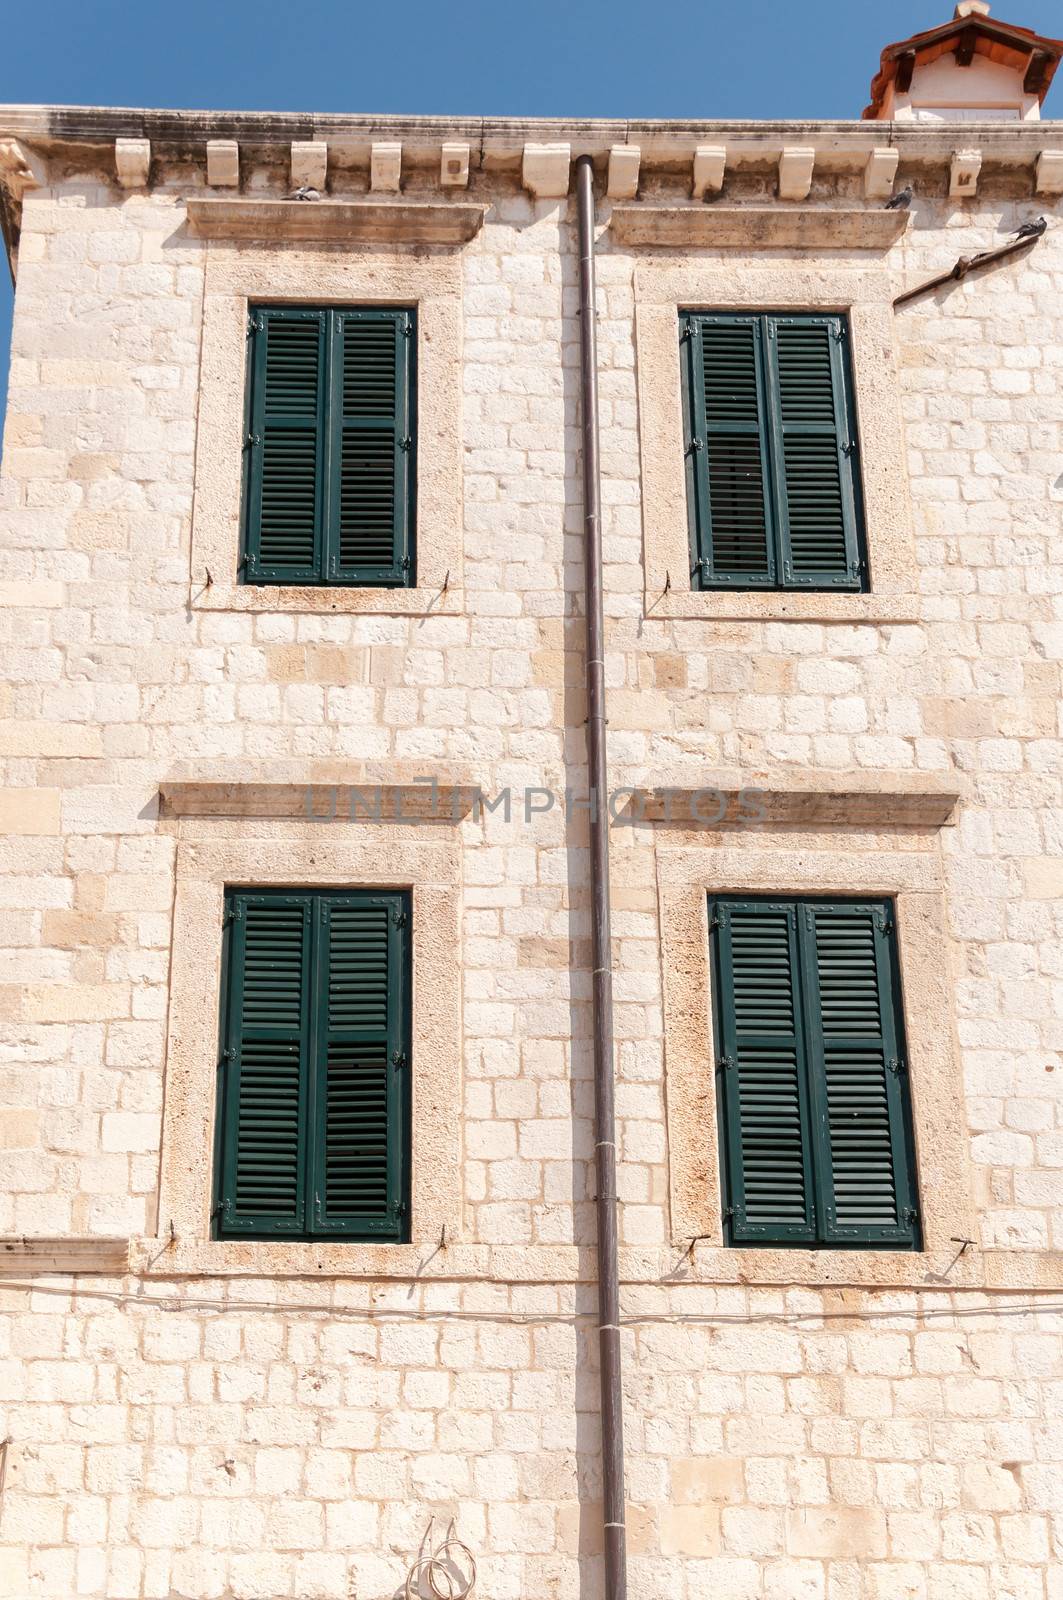 Framed ancient windows with green shutters in a rows.